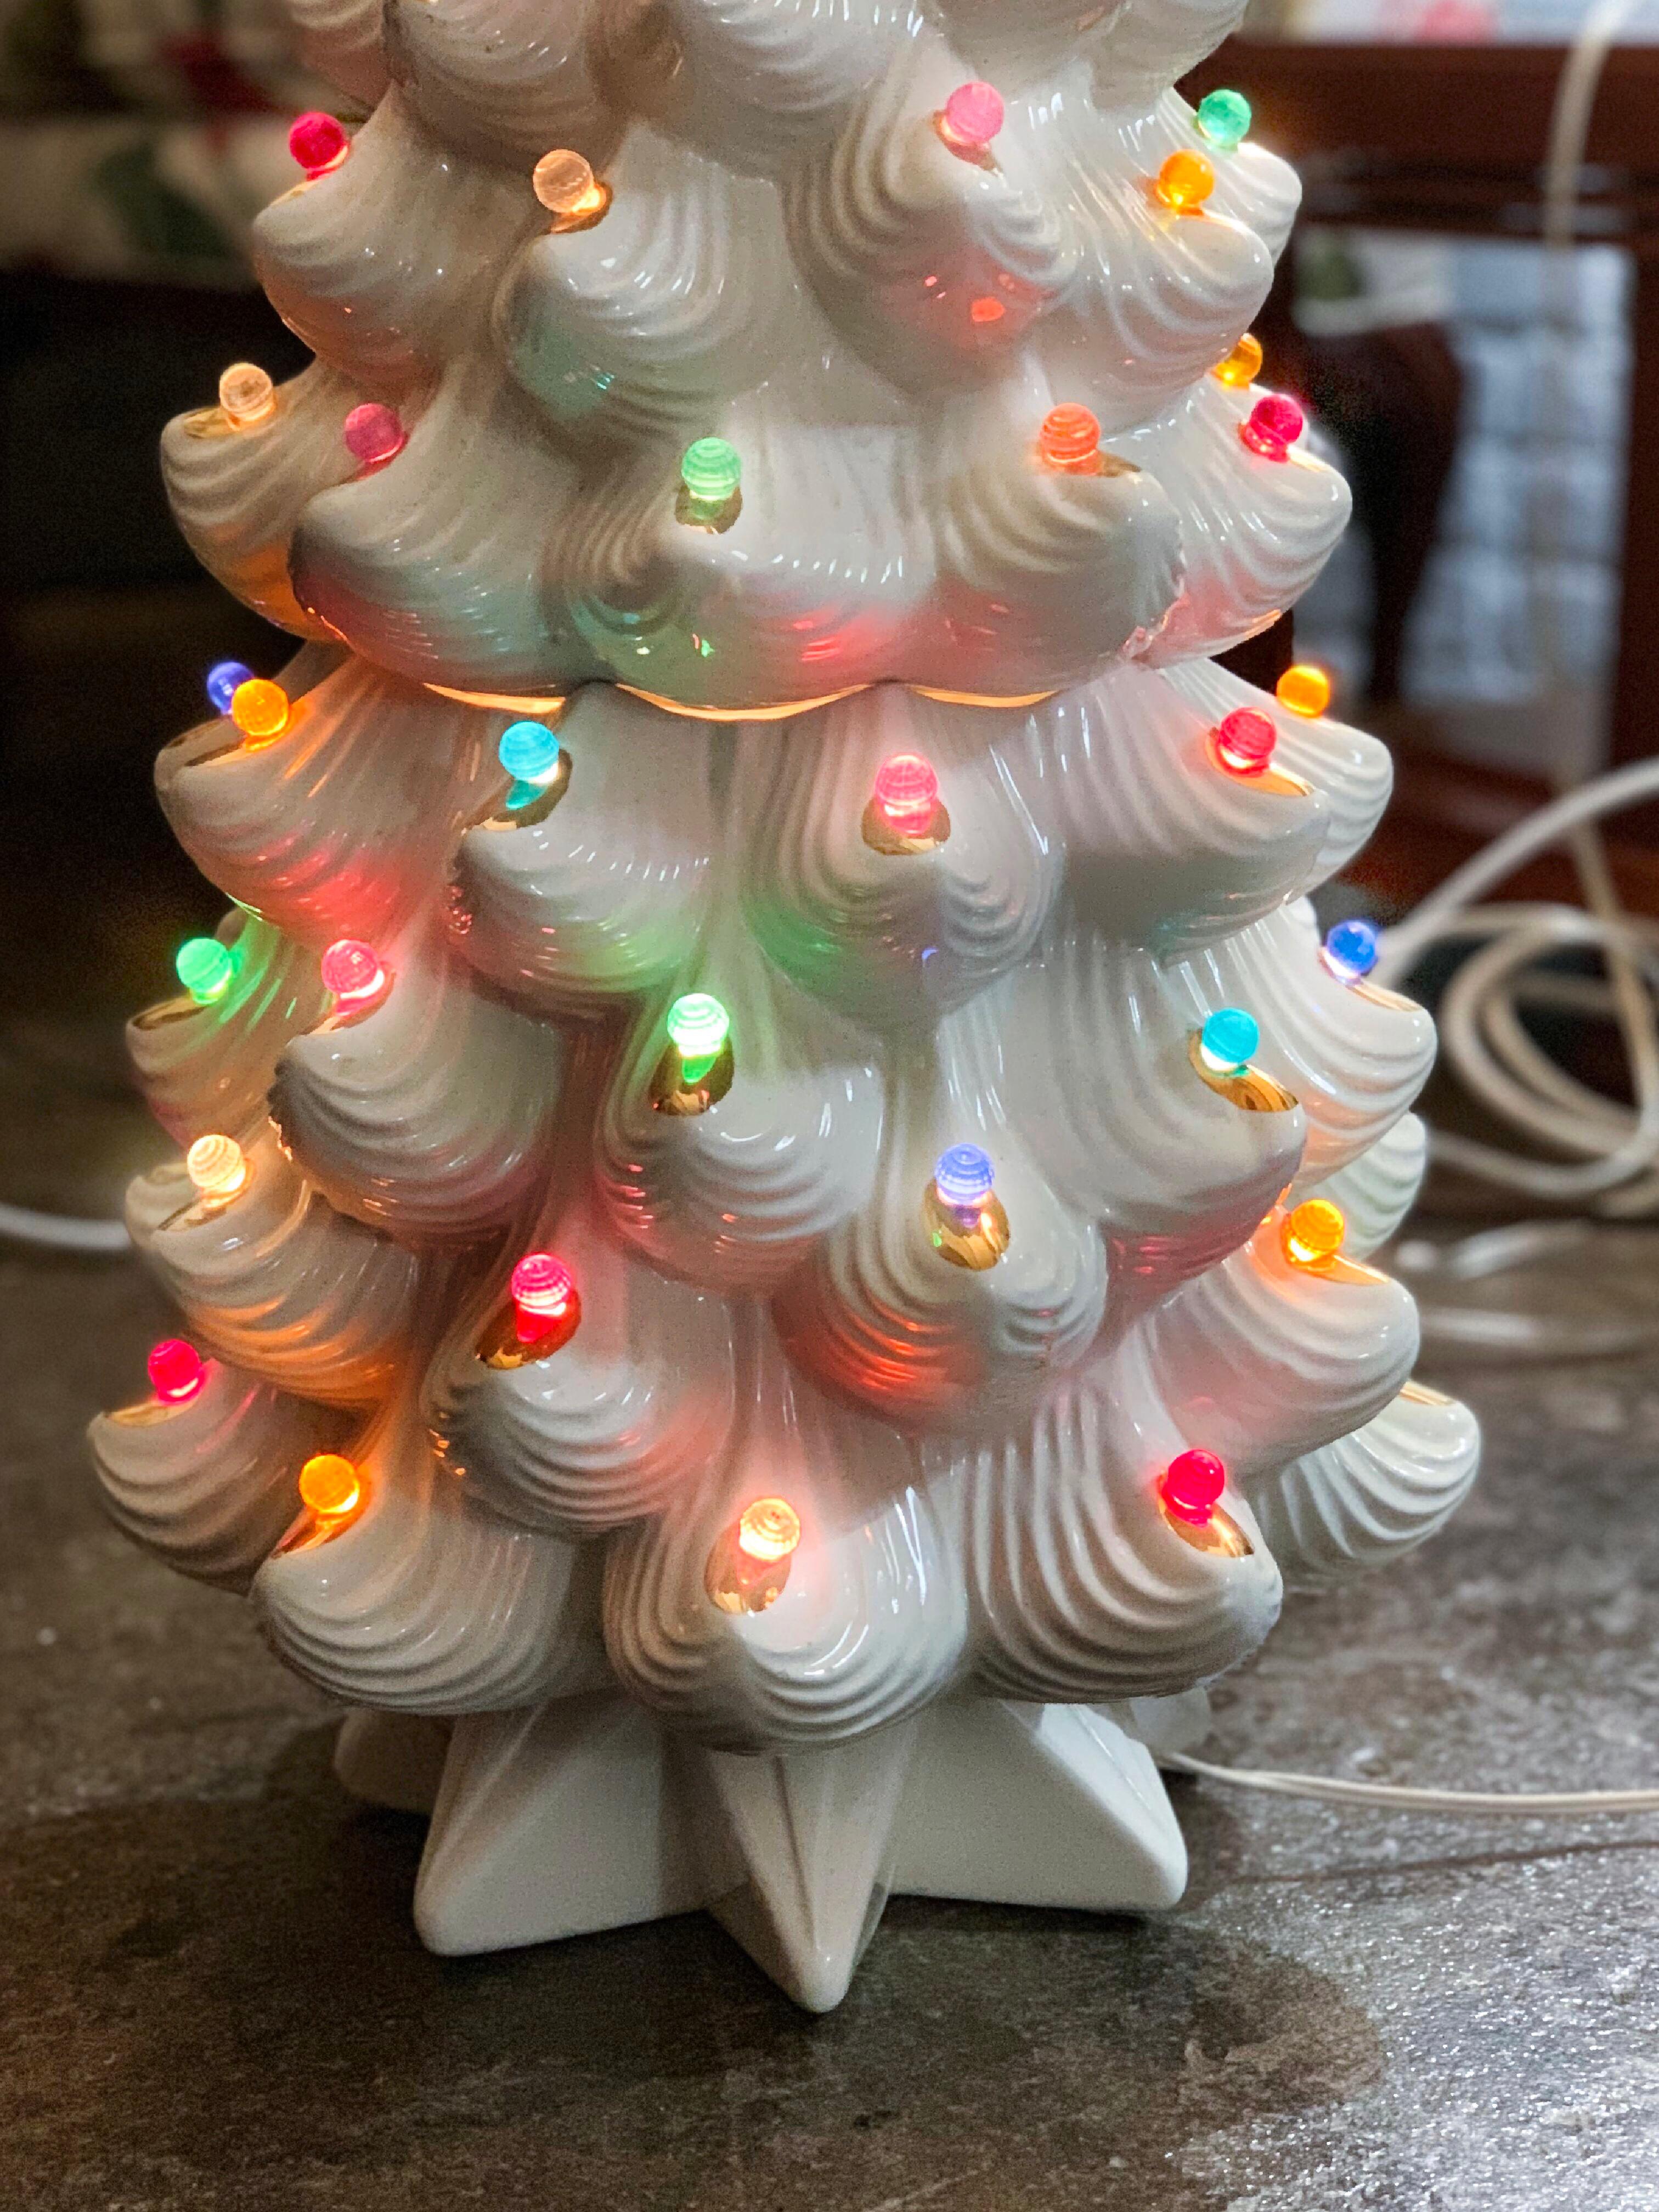 Monumental midcentury ceramic Christmas tree, Atlantic mold, white, gold tips, three-part assembly, height 33.5”, diameter at widest is about 14”.